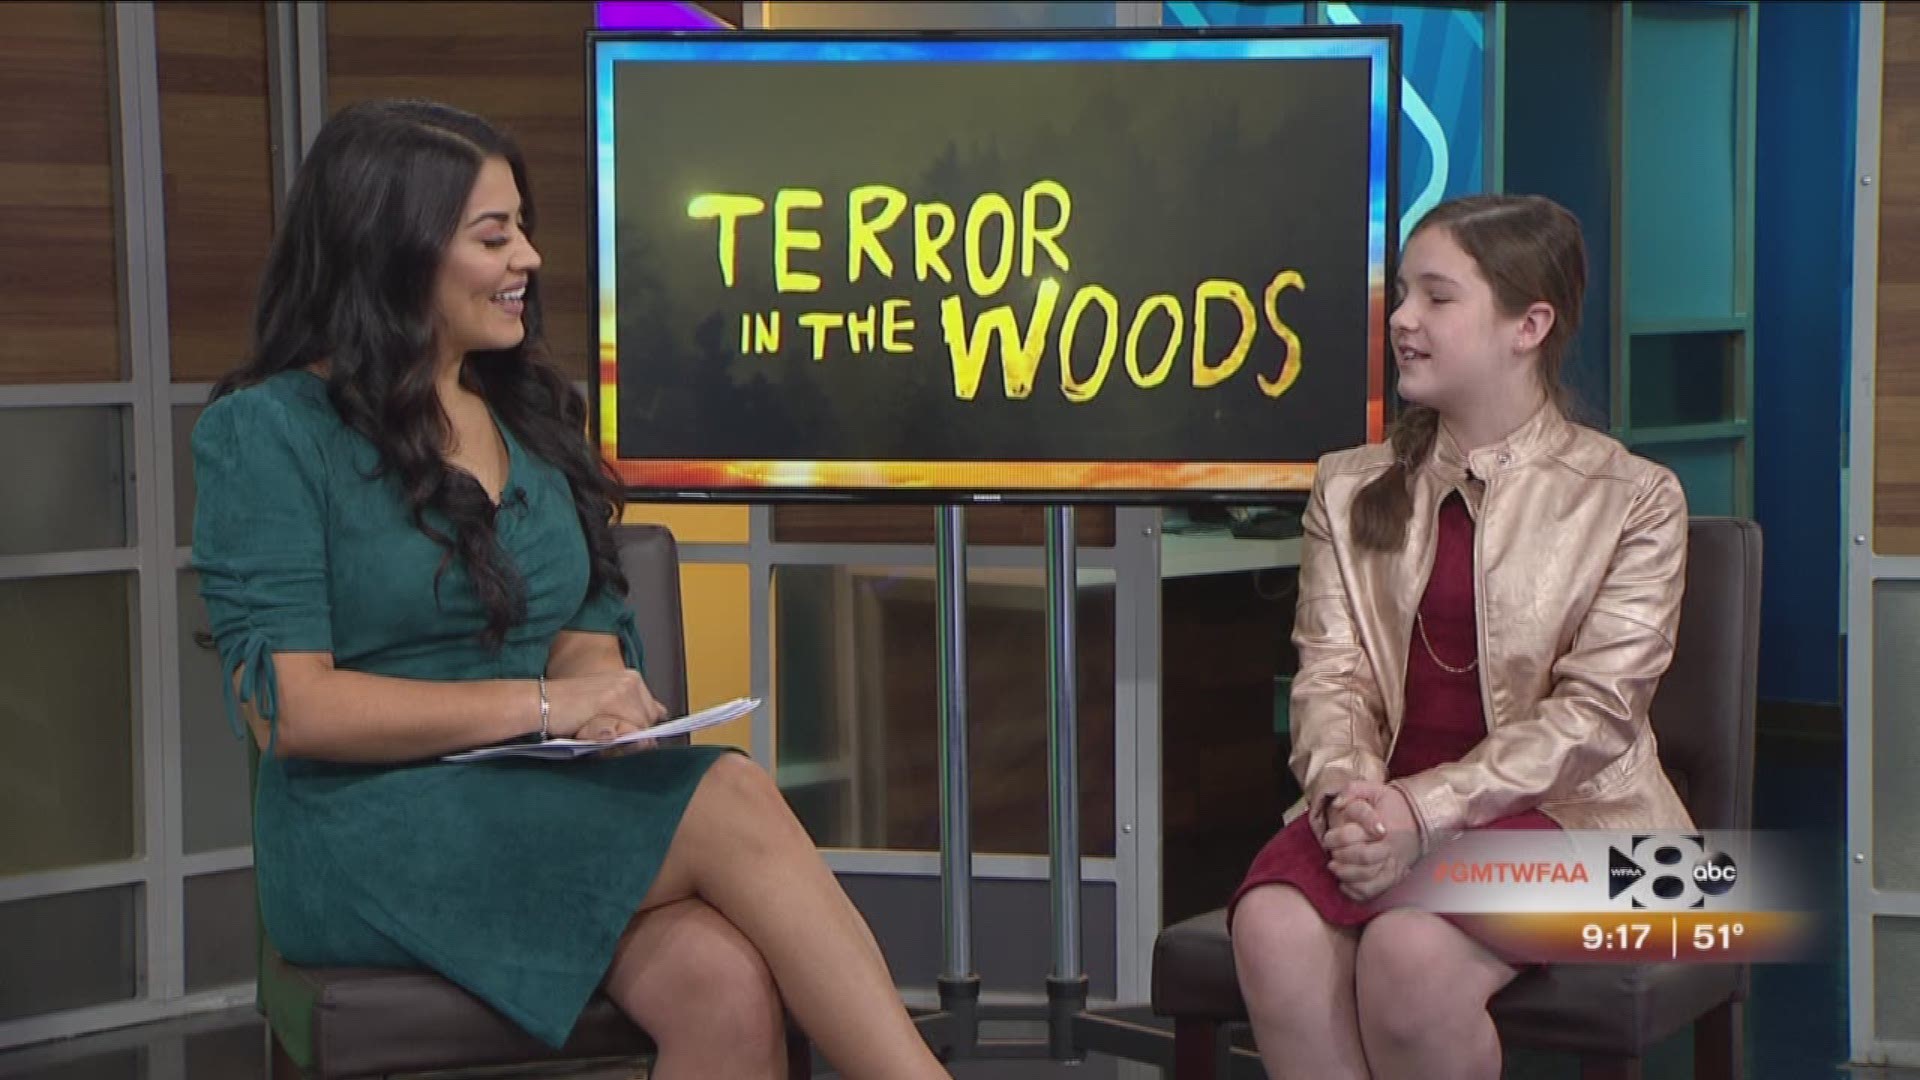 Stream "Terror in the Woods" at mylifetime.com/movies or on iTunes or Amazon Prime.